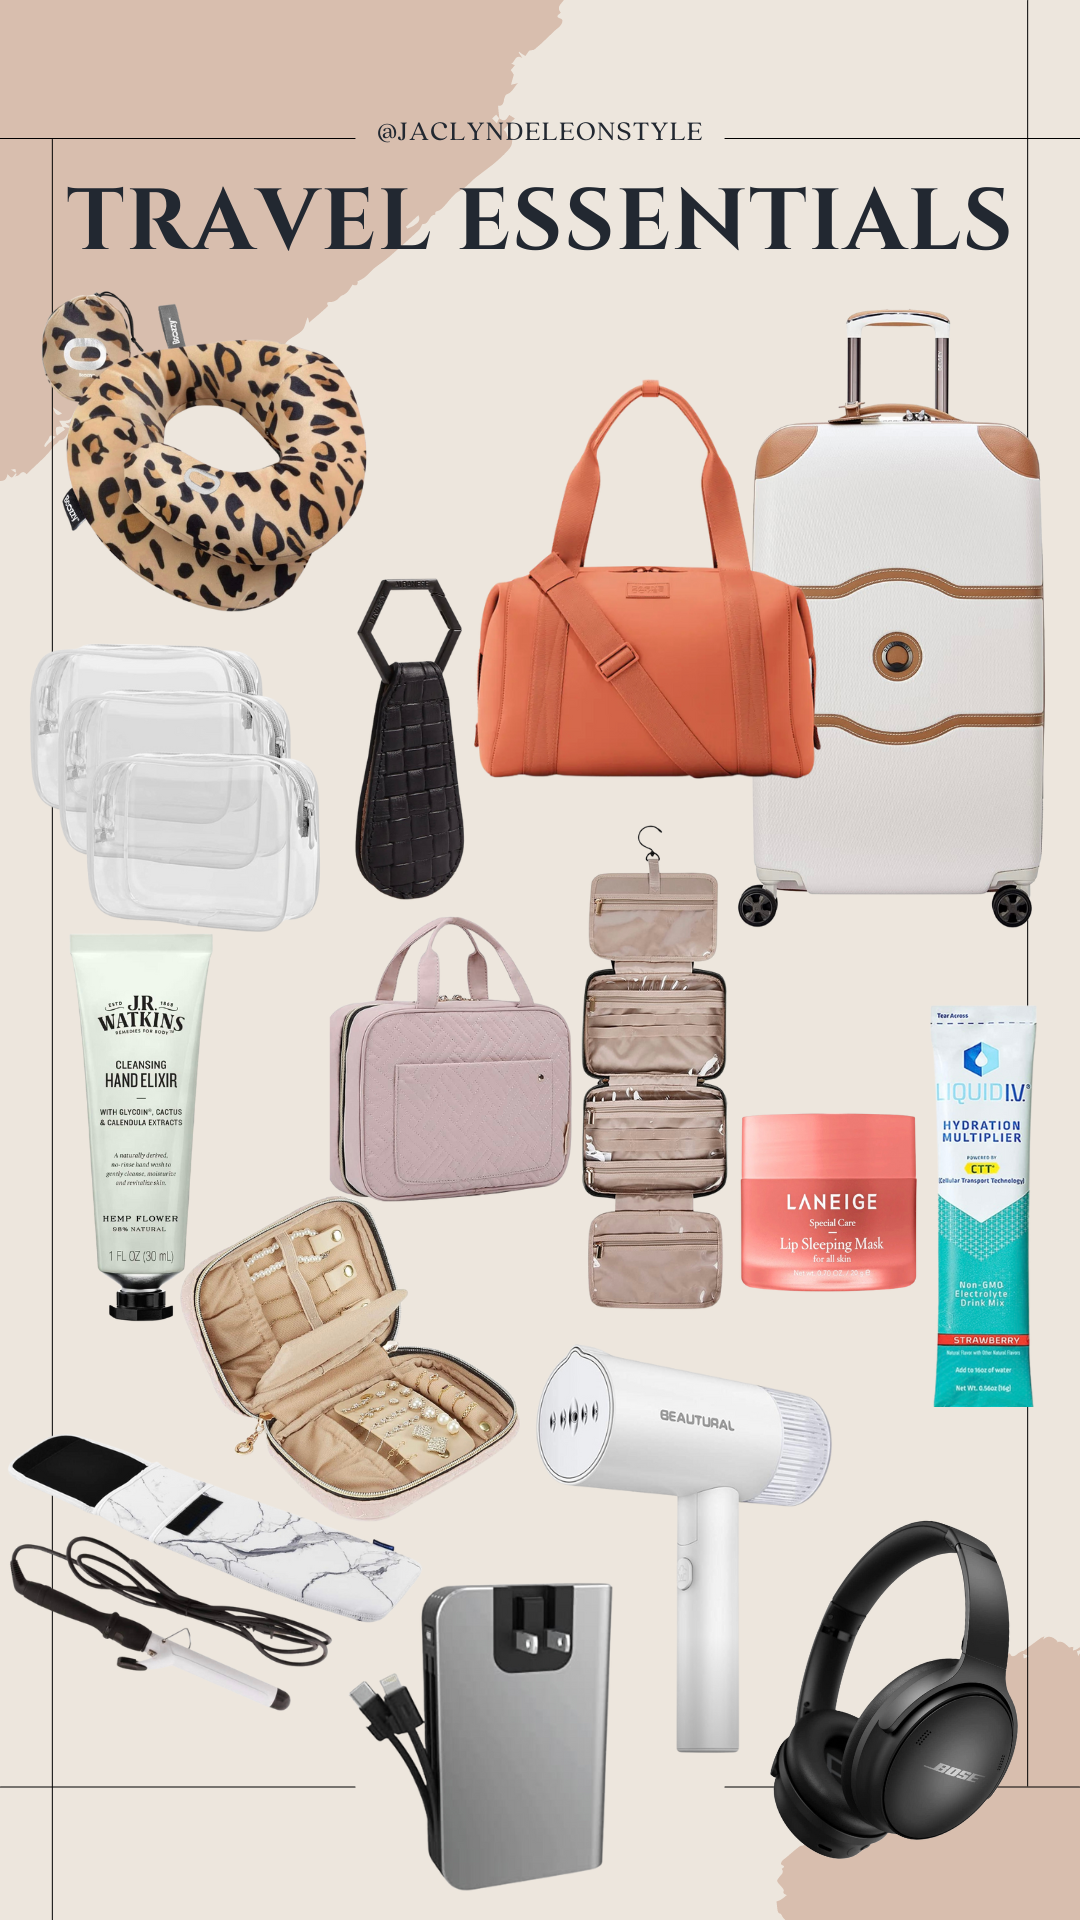 MY TRAVEL ESSENTIALS-Jaclyn De Leon style. All my favorite must-haves when I travel. Favorite products for travel.